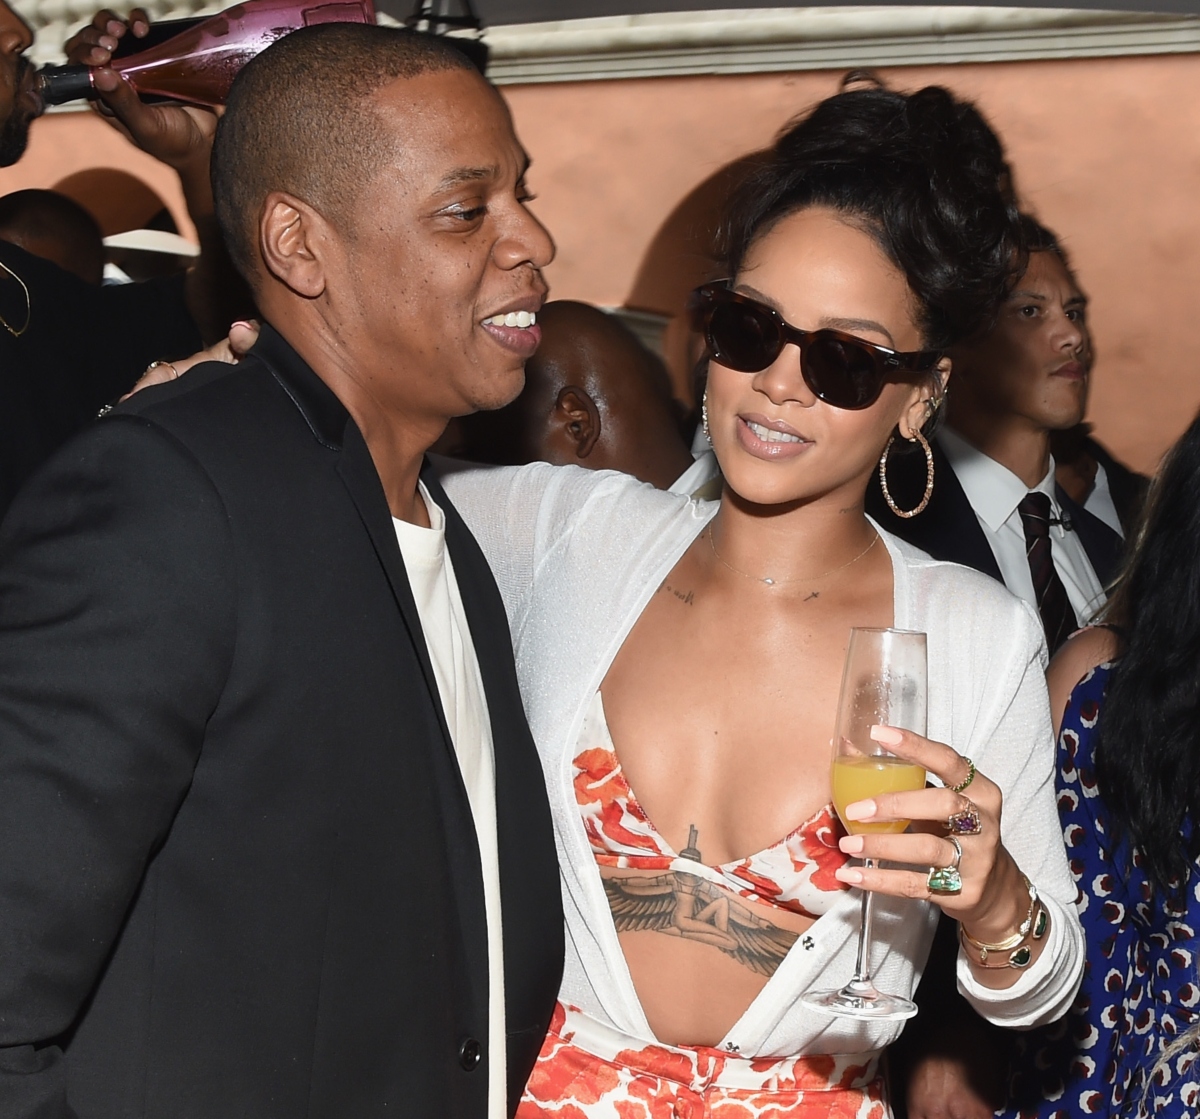 Collaboration Rumors Swirl After Rihanna And Jay Z Are Seen Together